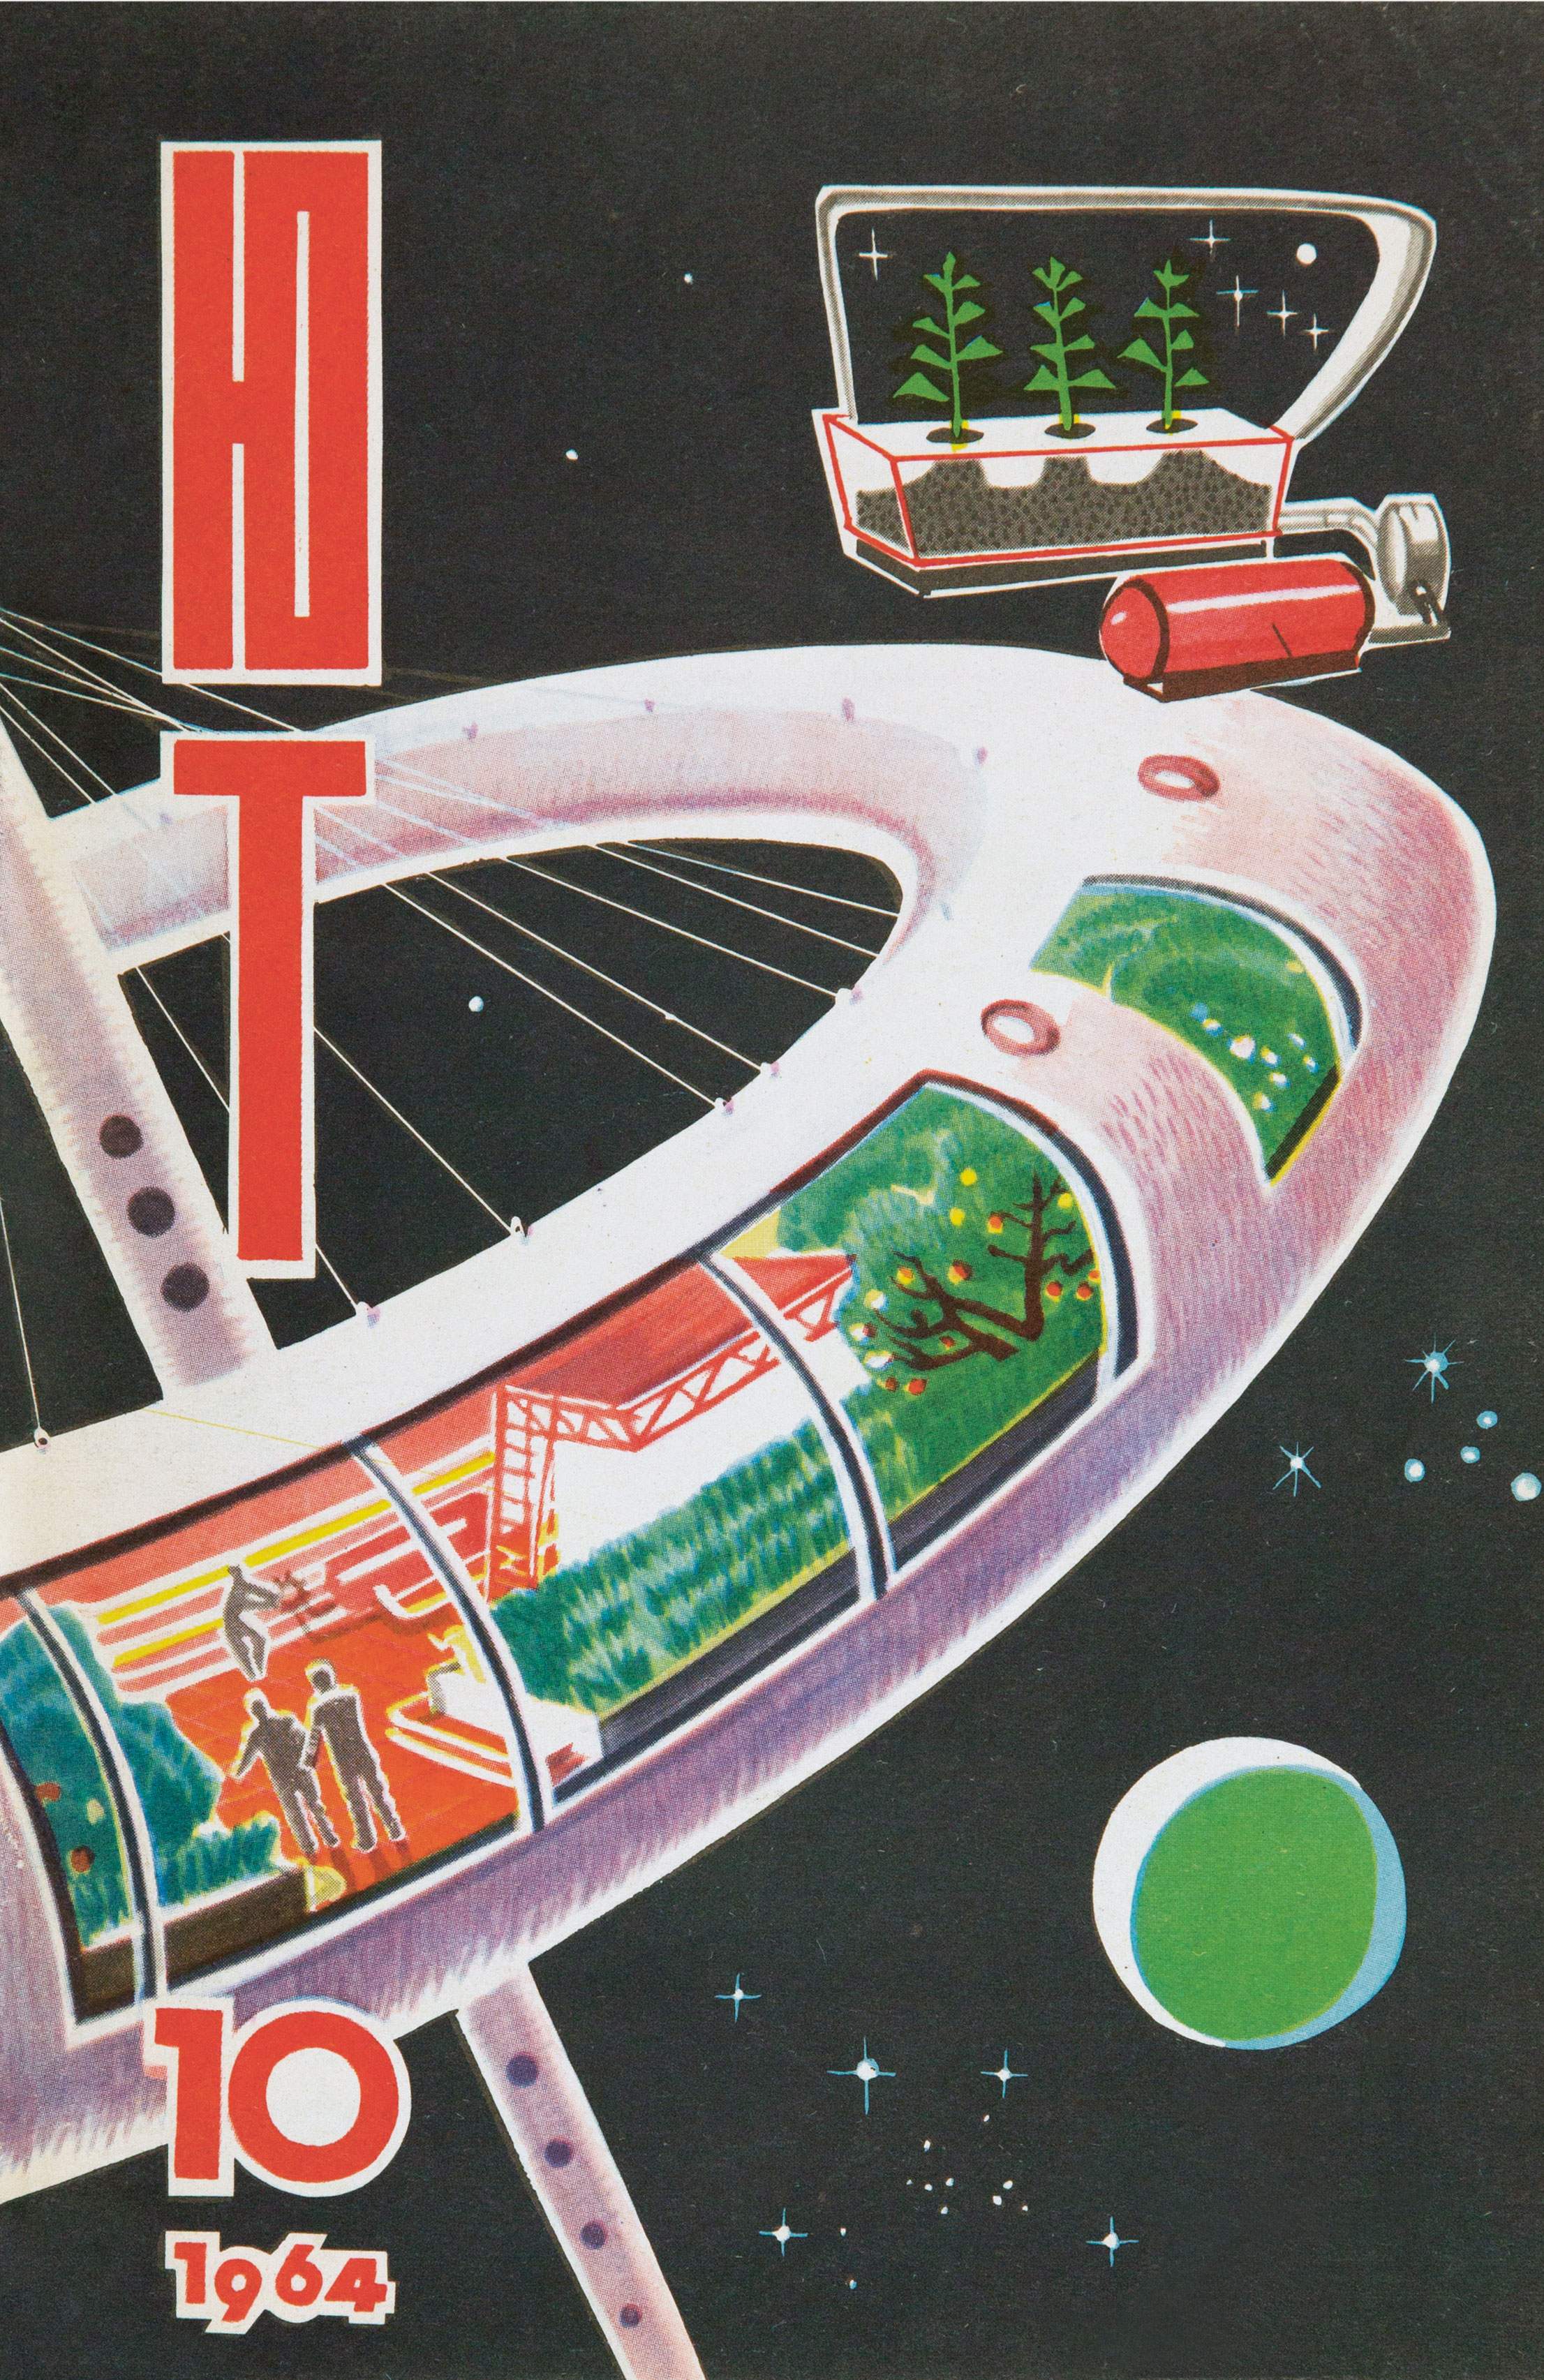 Young Technician, issue 10, 1964, illustration by R. Avotin for the article ‘Space Greenhouse’, which hypothesizes on the creation of an environment suitable for growing plants in space.